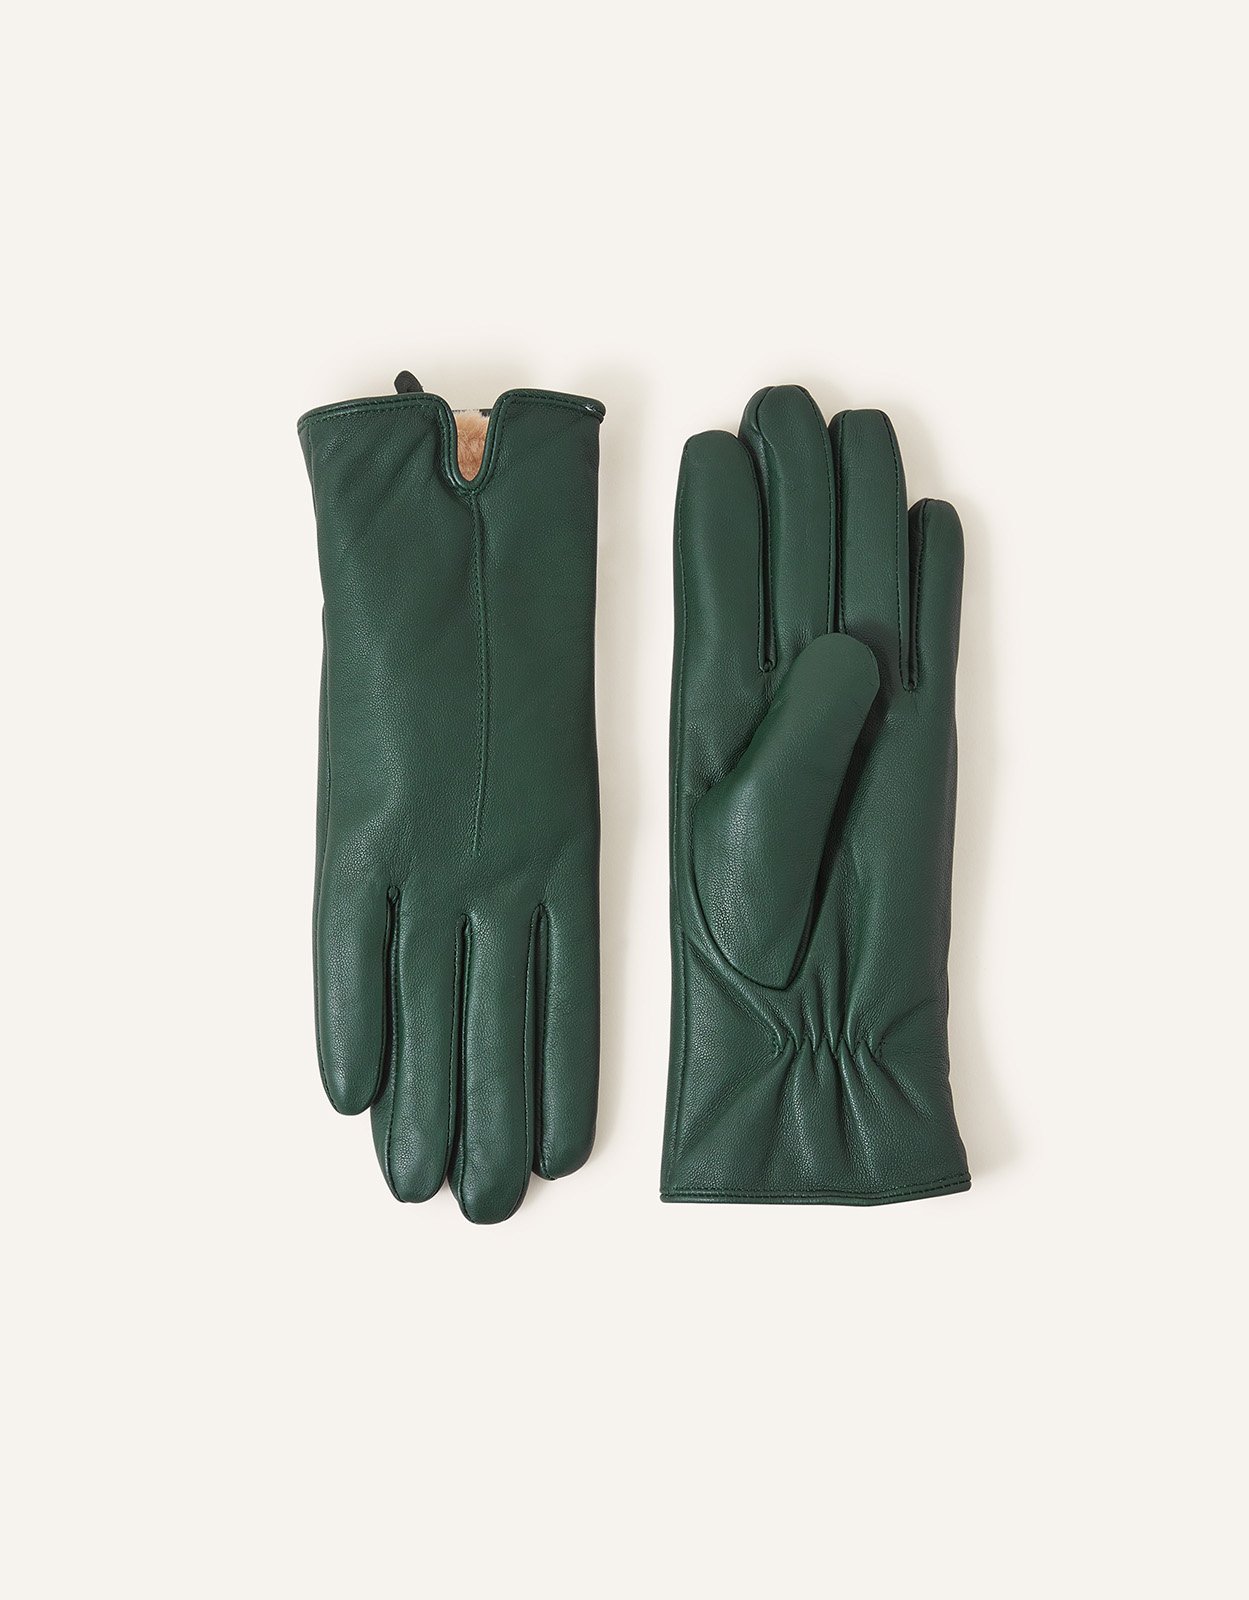 Accessorize Faux Fur-Lined Leather Gloves Green